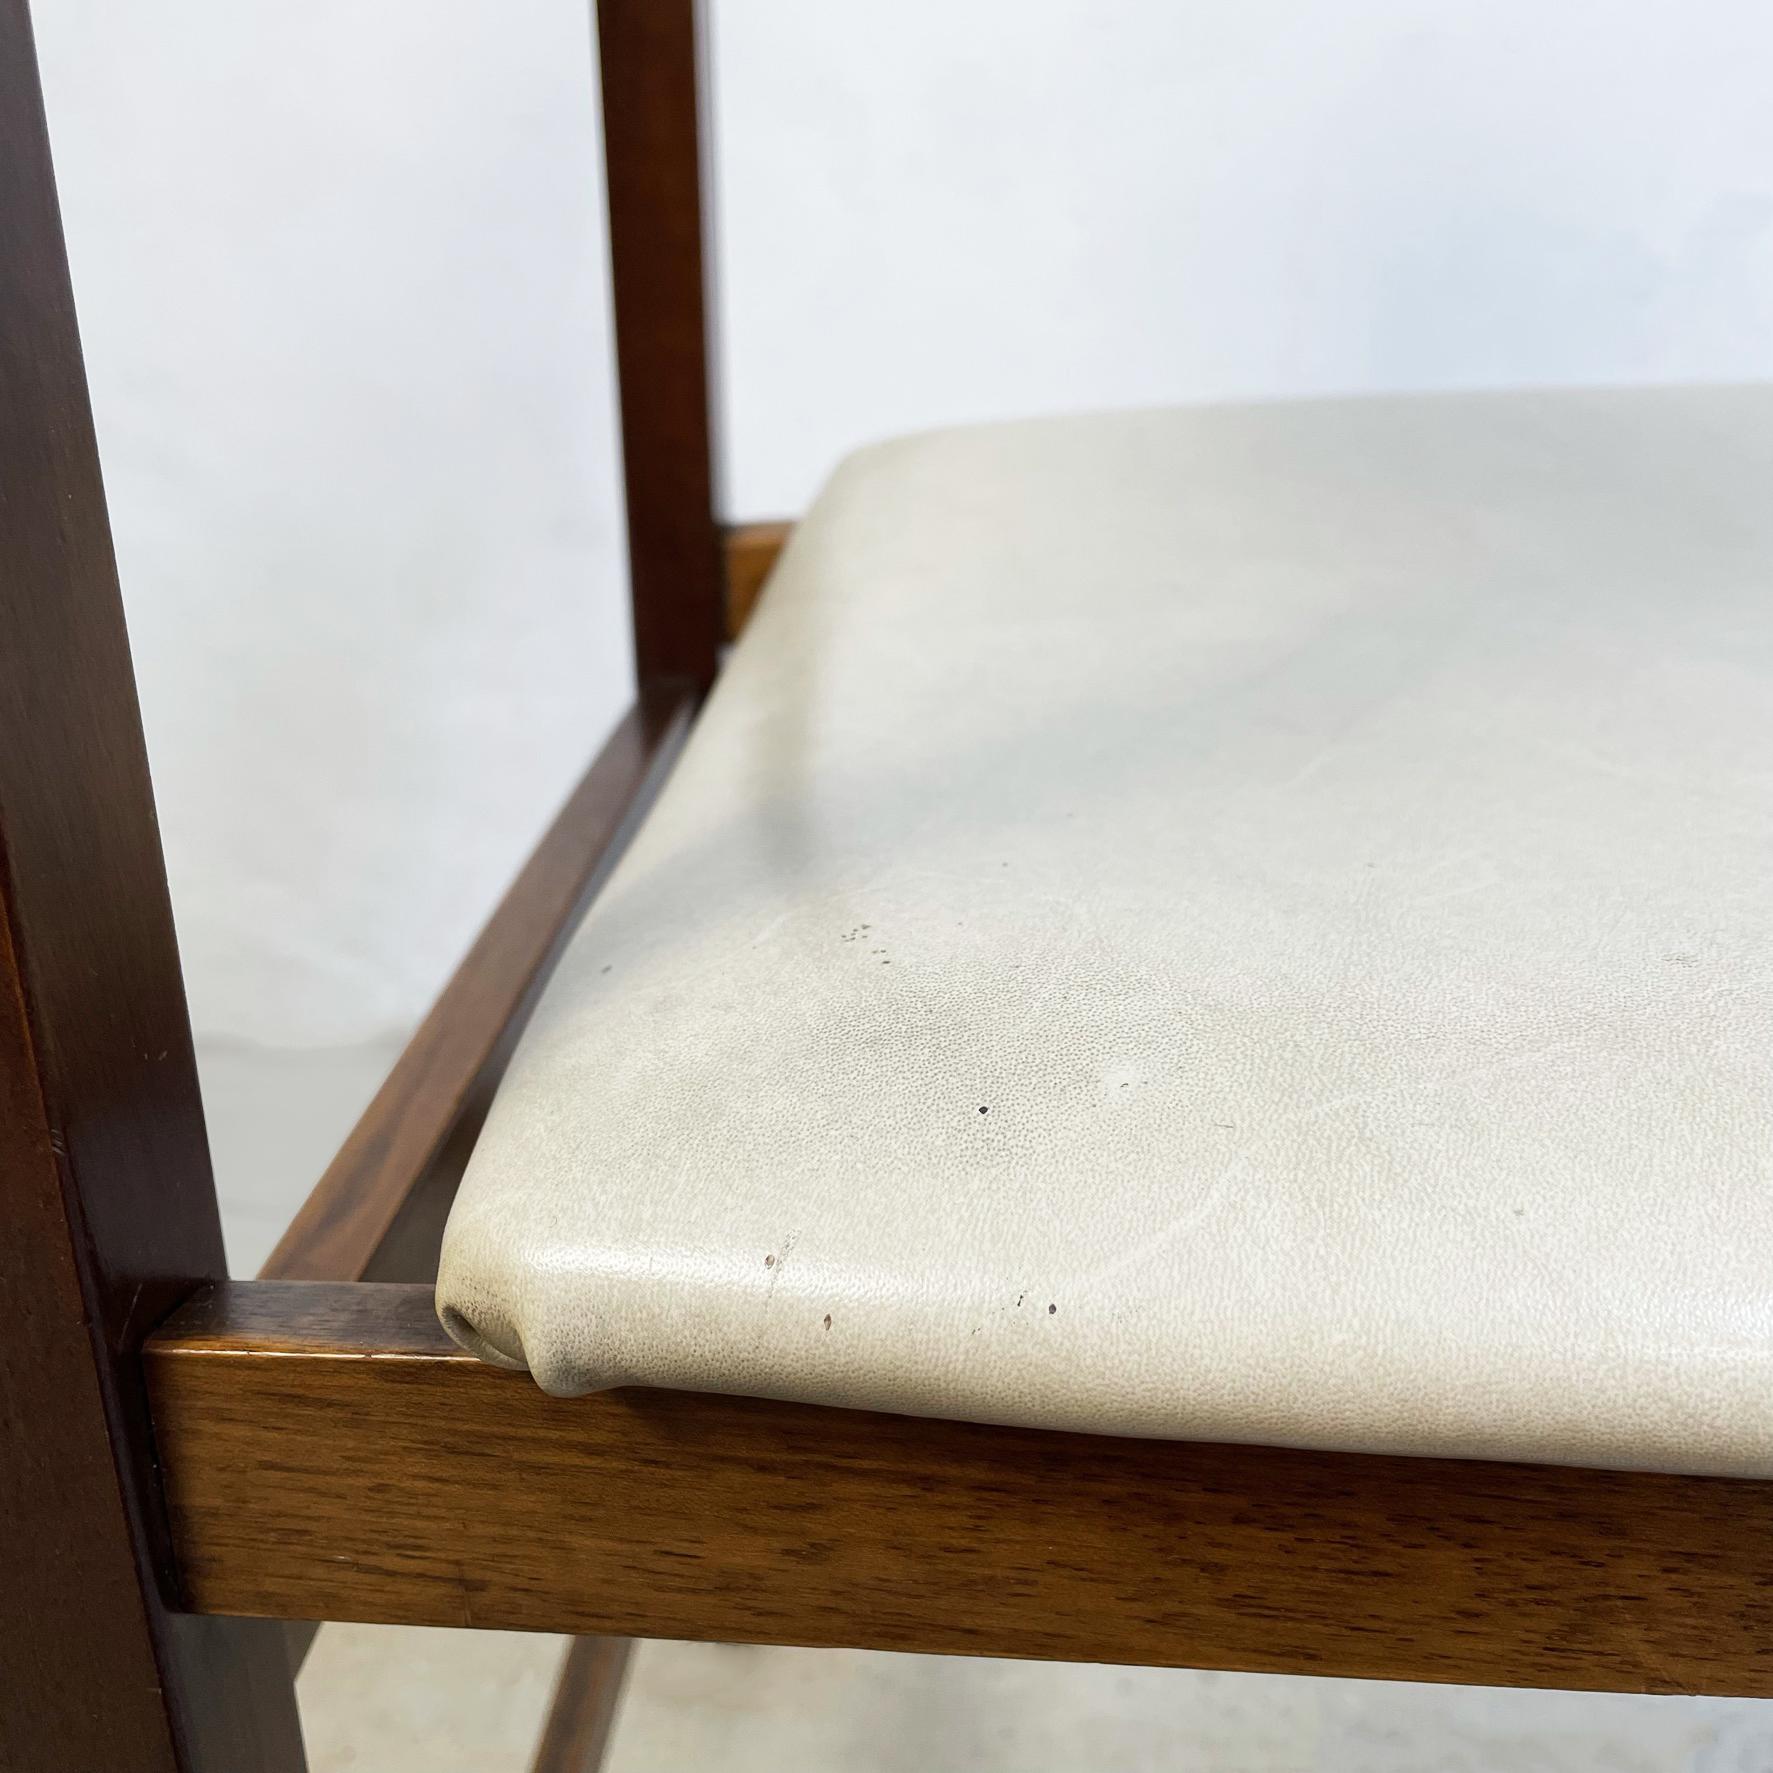 Italian Mid-Century Modern Wooden Chair with Leather Square Seat, 1960s For Sale 2